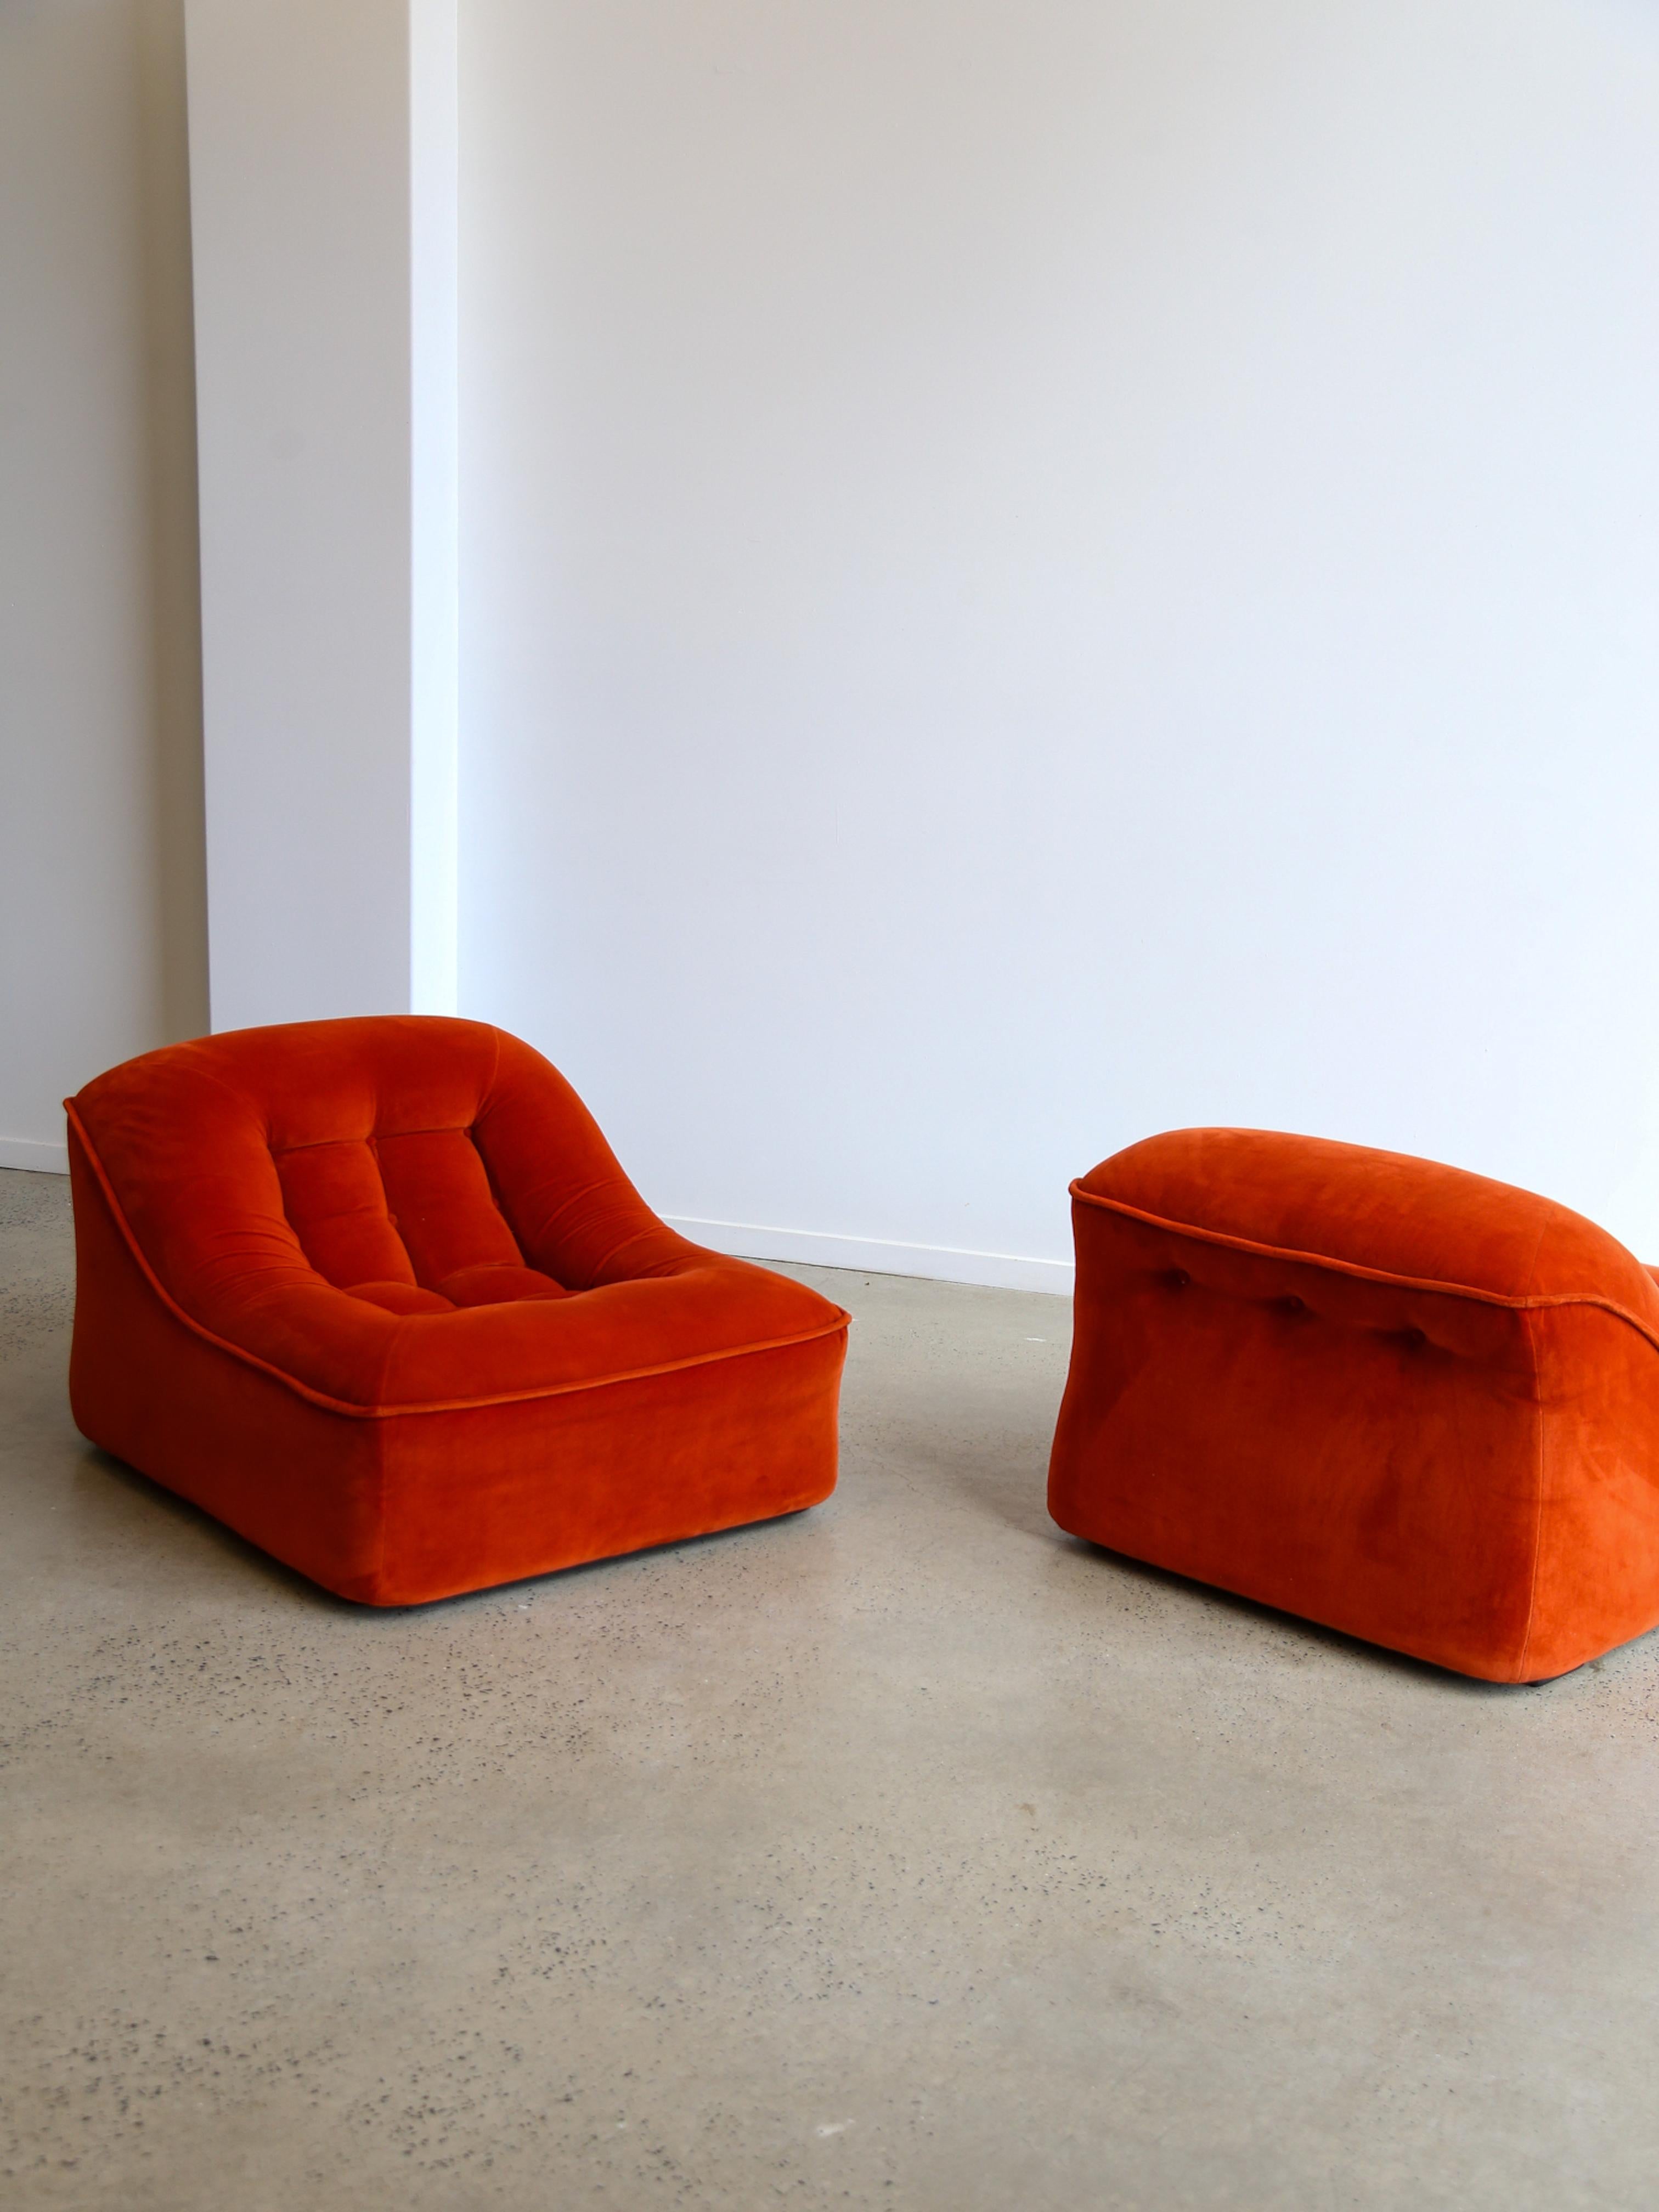 Italian Modular Sofa Model Lando Set of Two in Red Velvet & Abs In Good Condition For Sale In Byron Bay, NSW